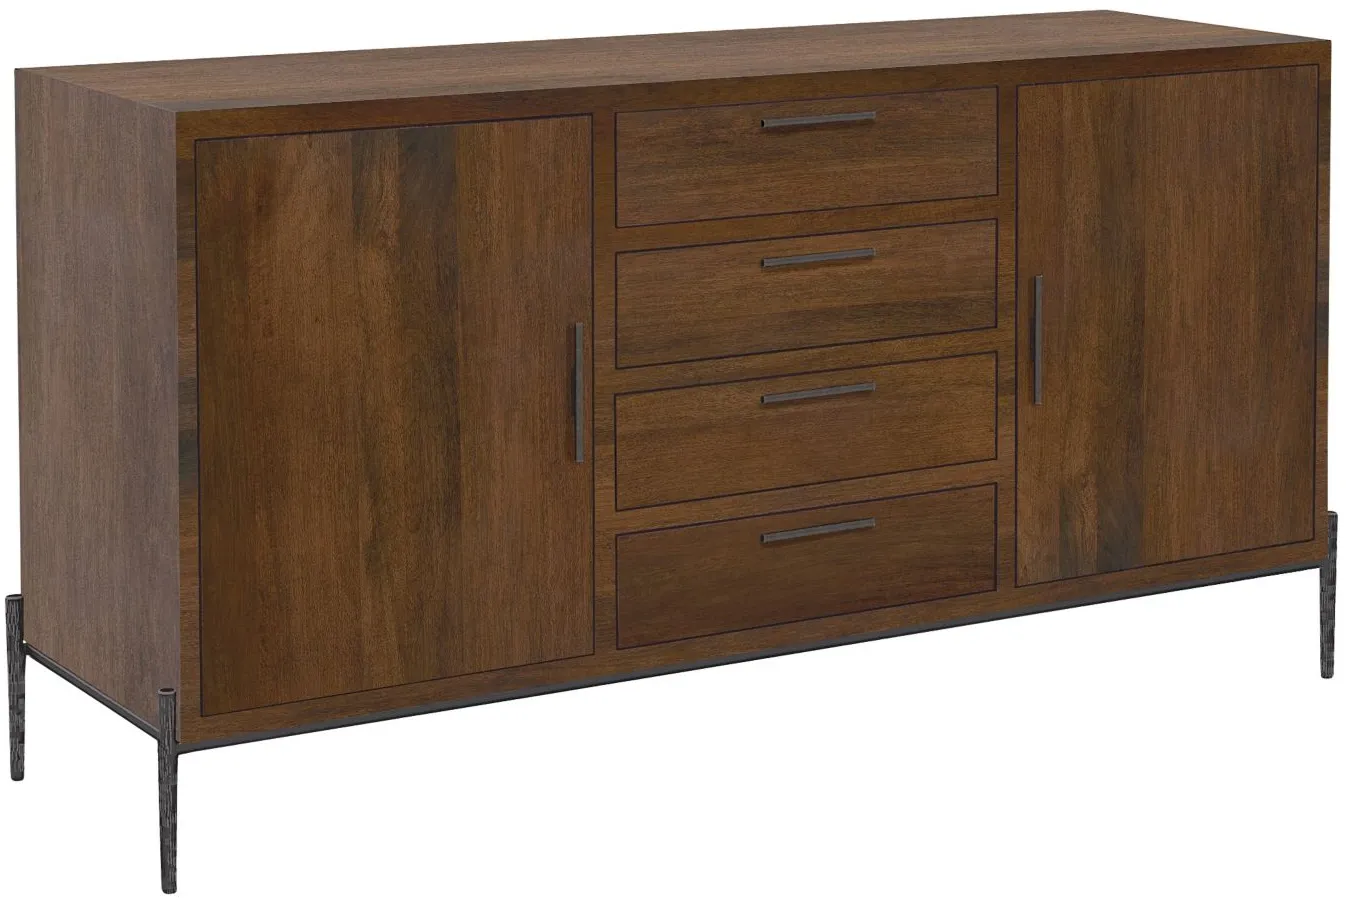 Bedford Park Buffet in TOBACCO by Hekman Furniture Company